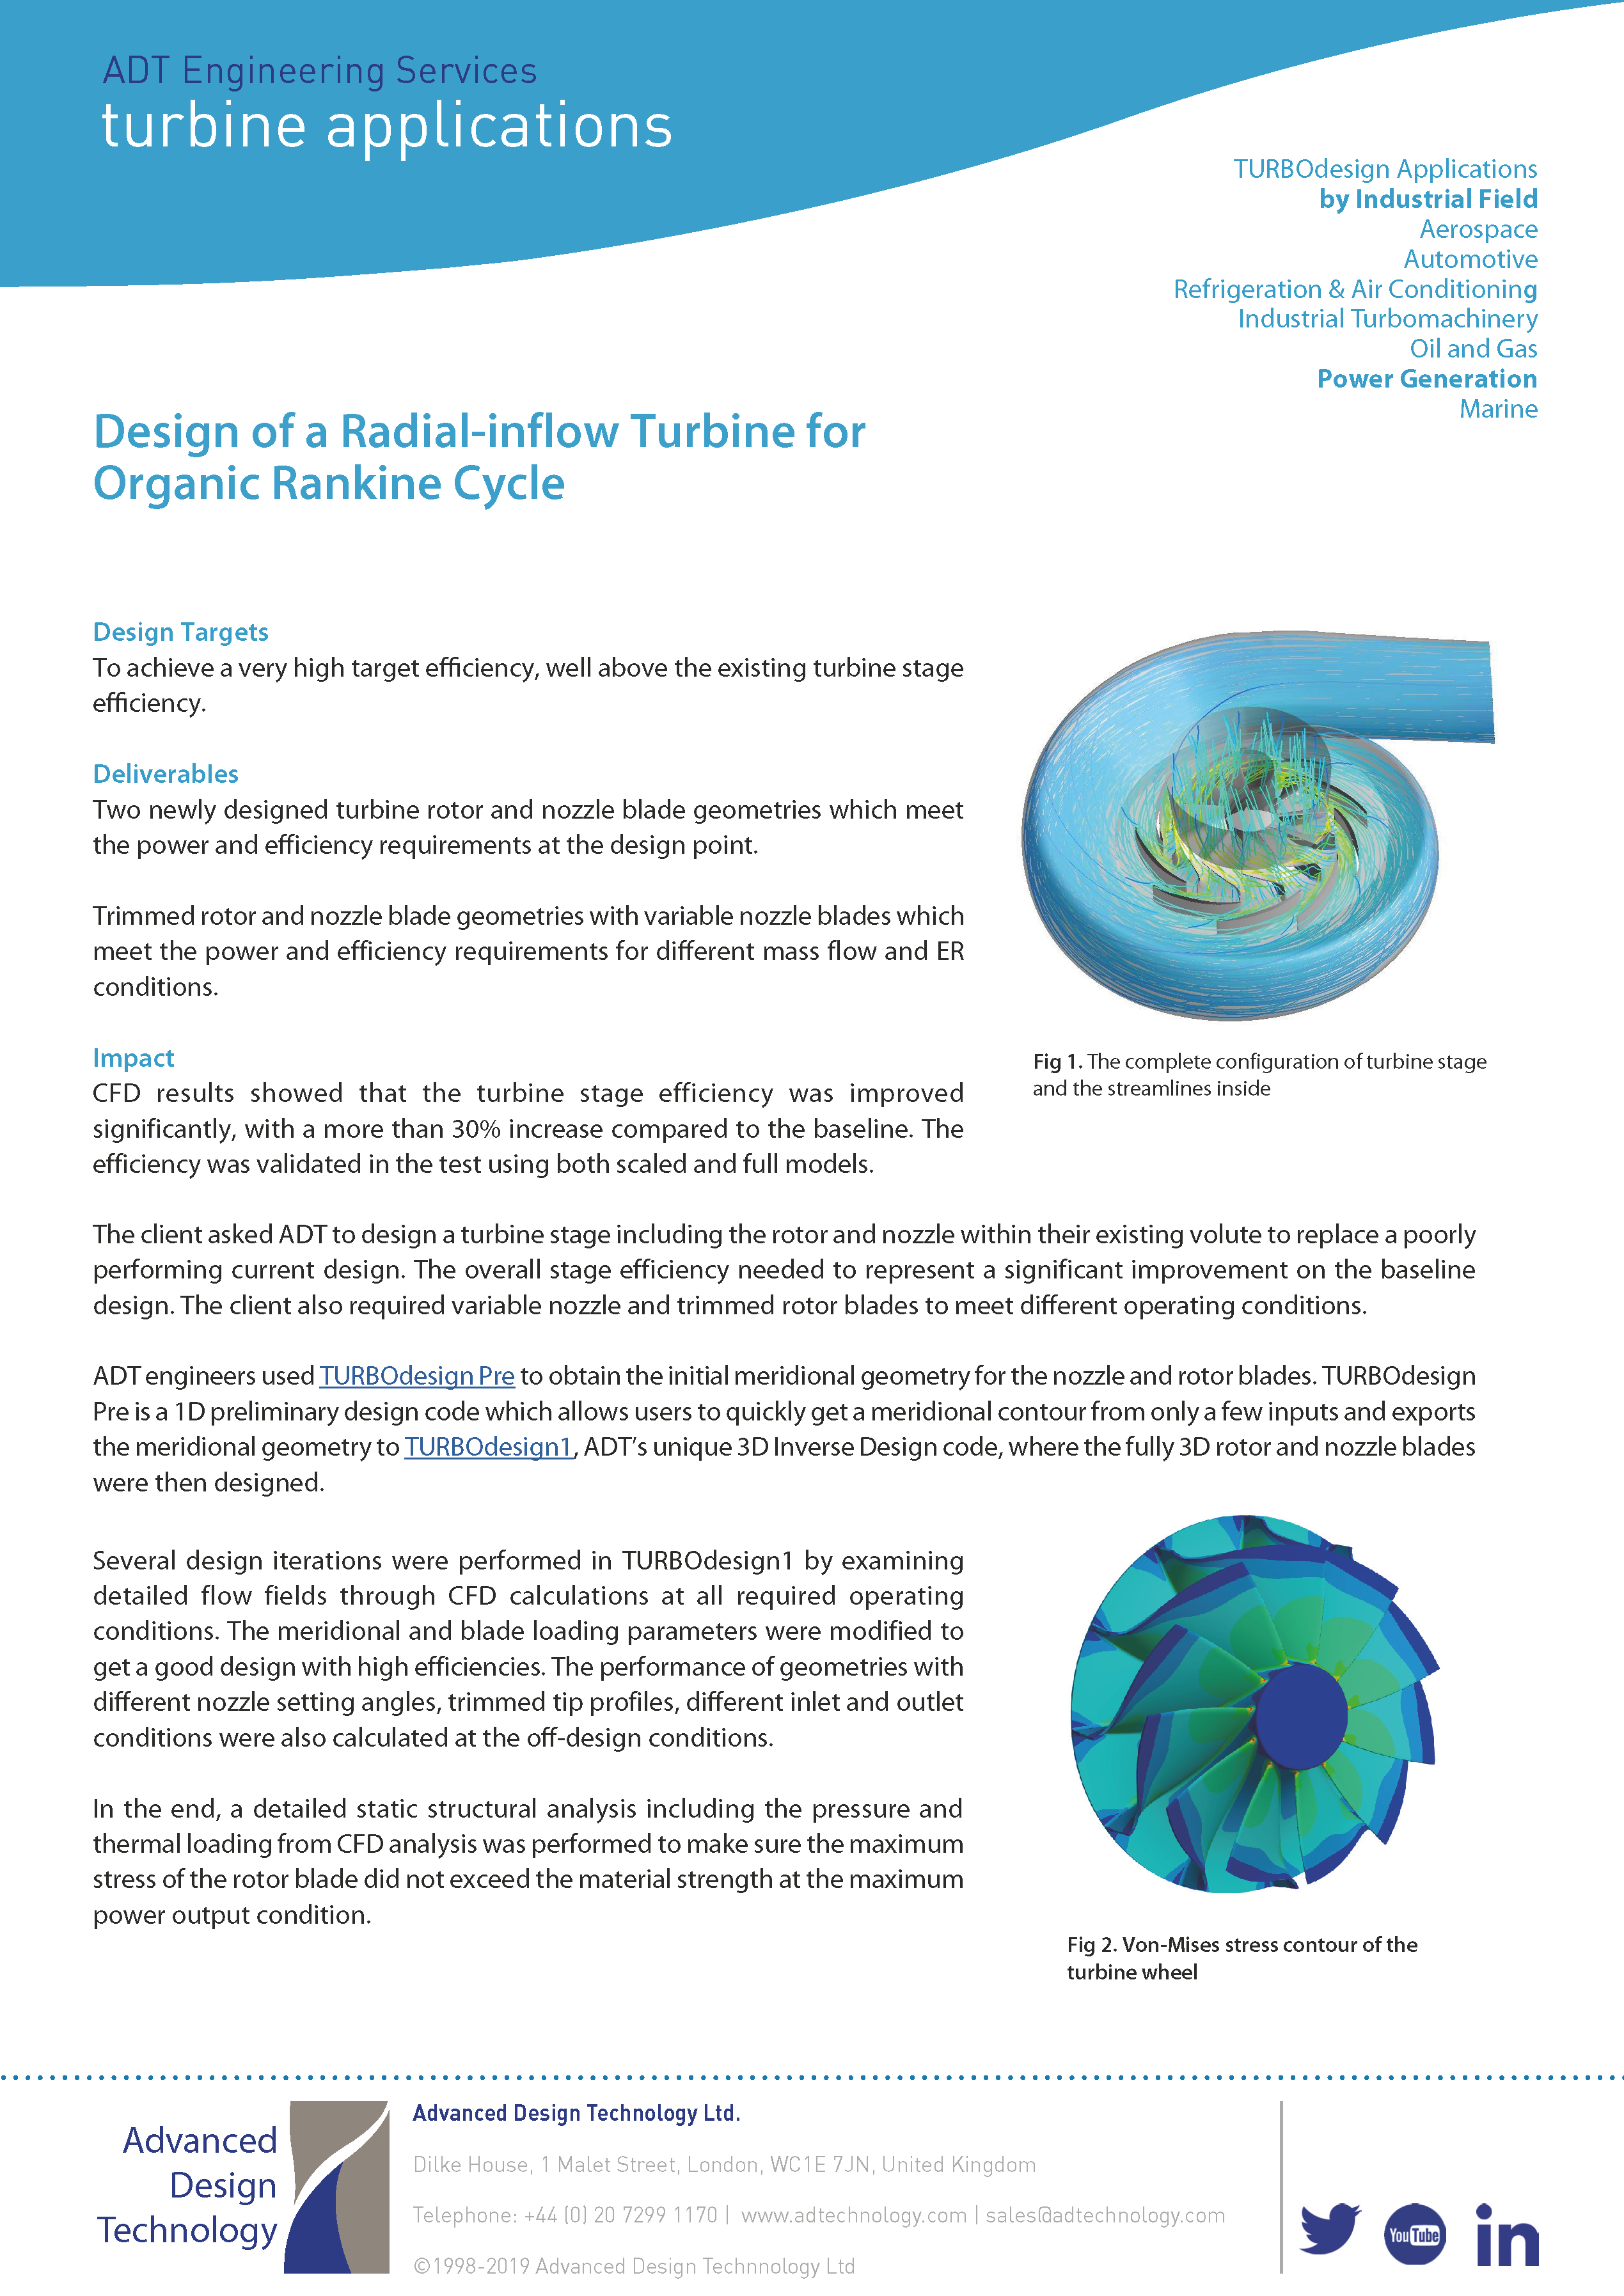 ADT Consultancy Summary - Design of a Radial Inflow Turbine front page